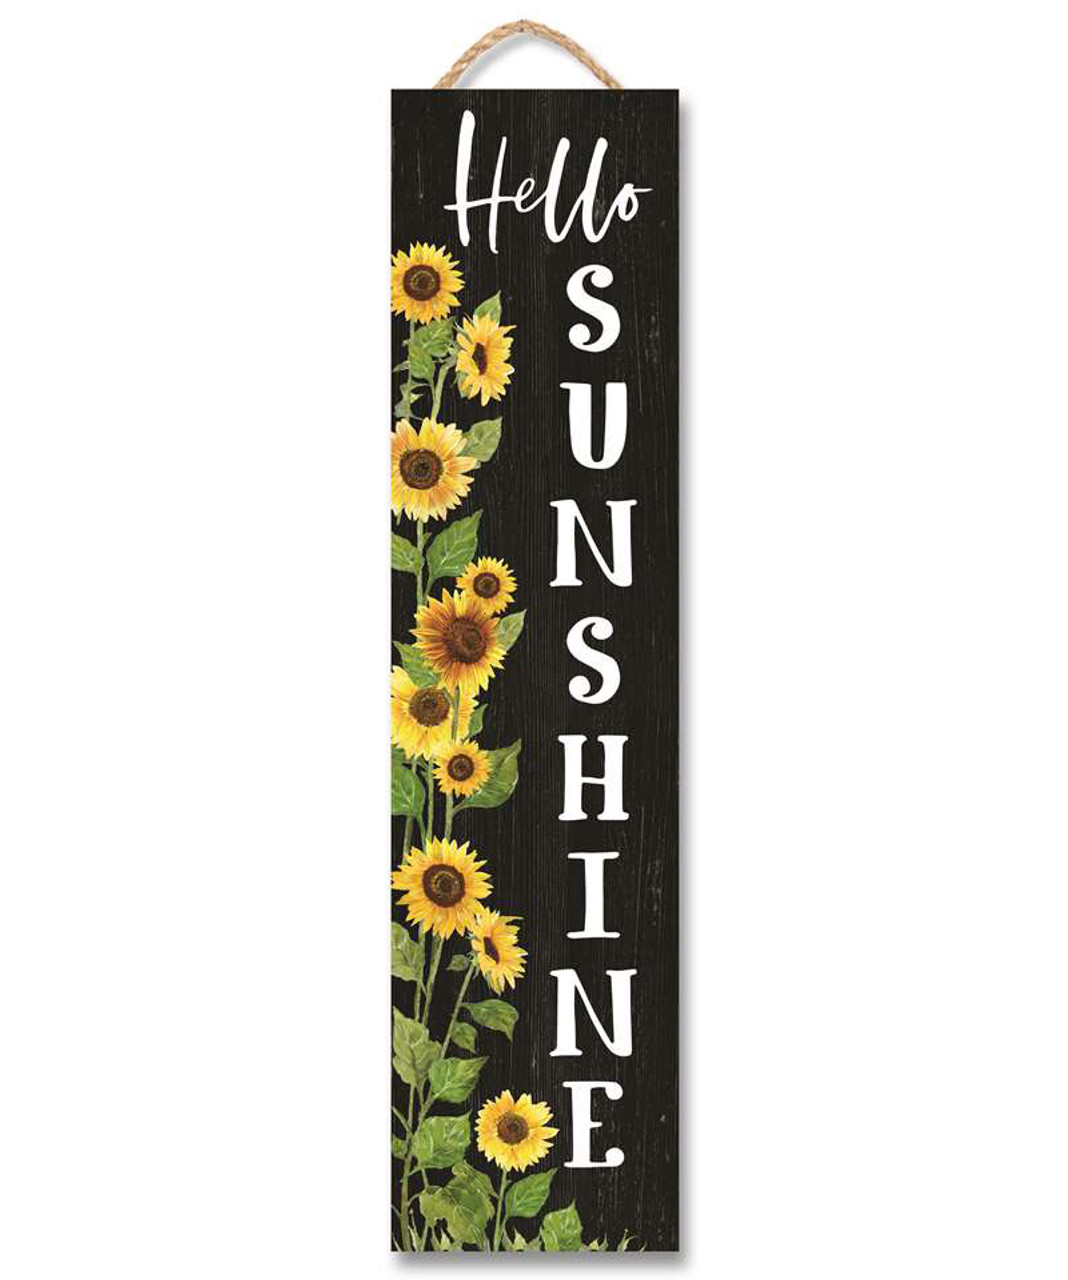 Hello Sunshine with Sunflowers - Outdoor Standing Lawn Sign 6x24in 